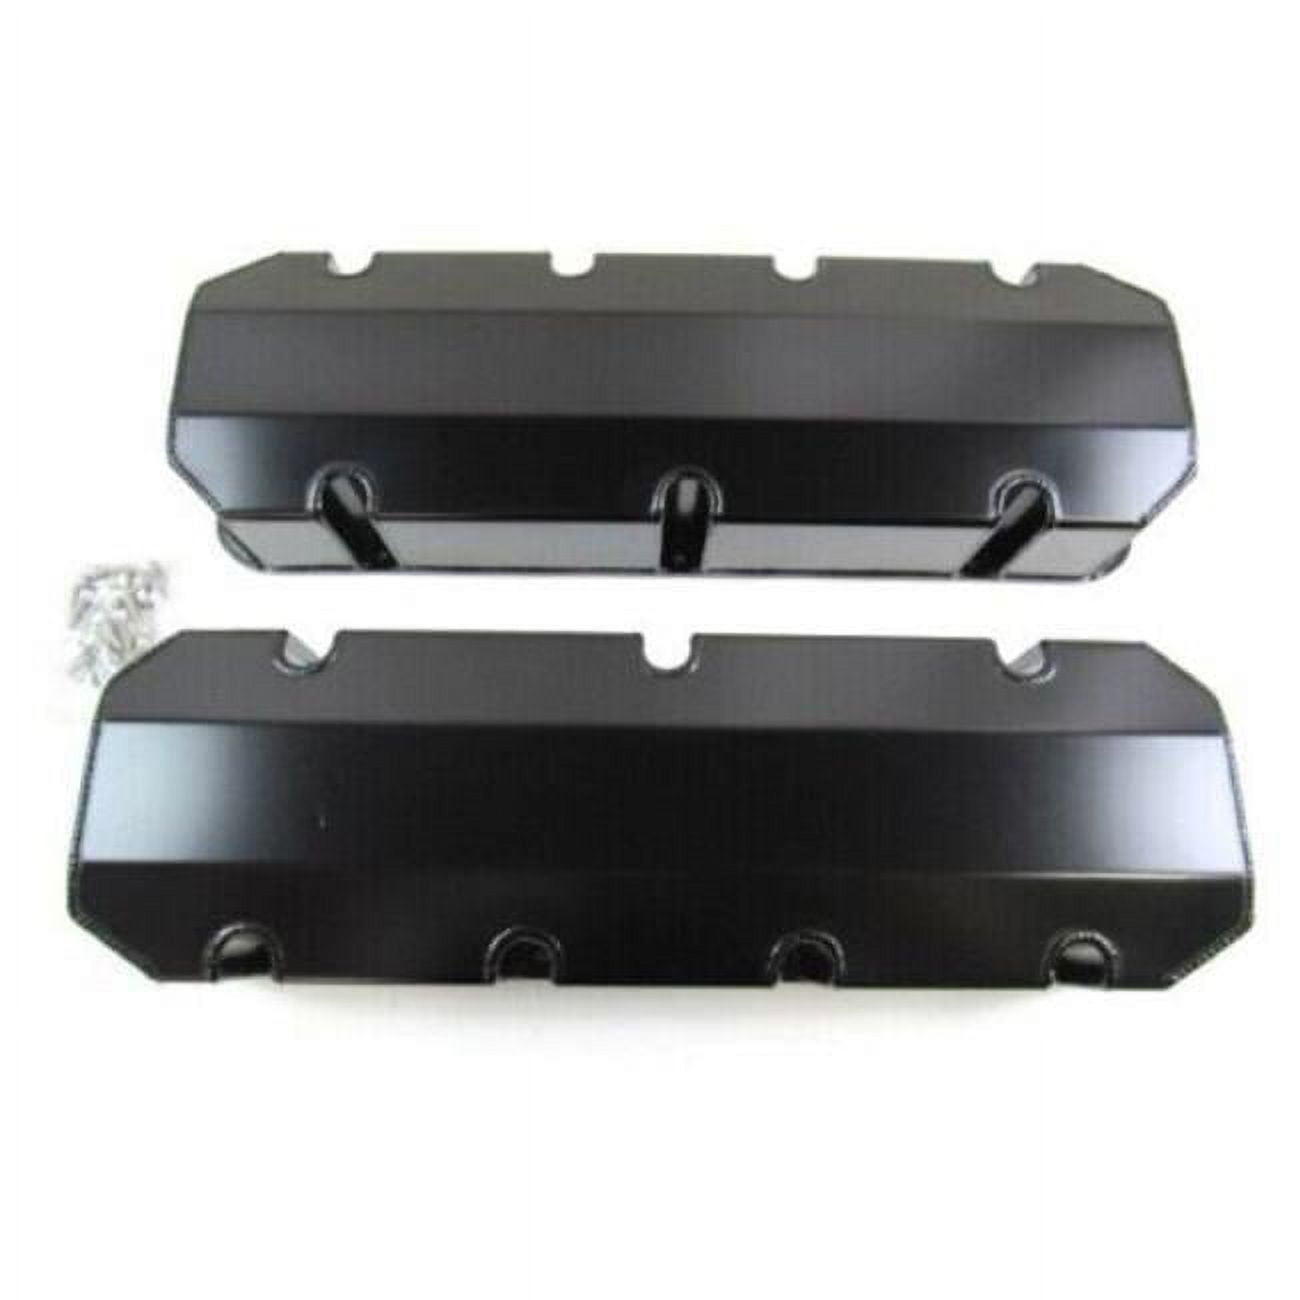 E41322BK BBC 454 Fabricated Tall Aluminum Valve Cover for Short Bolts without Holes, Black Andized - BPE-2315BK -  Bous Performance